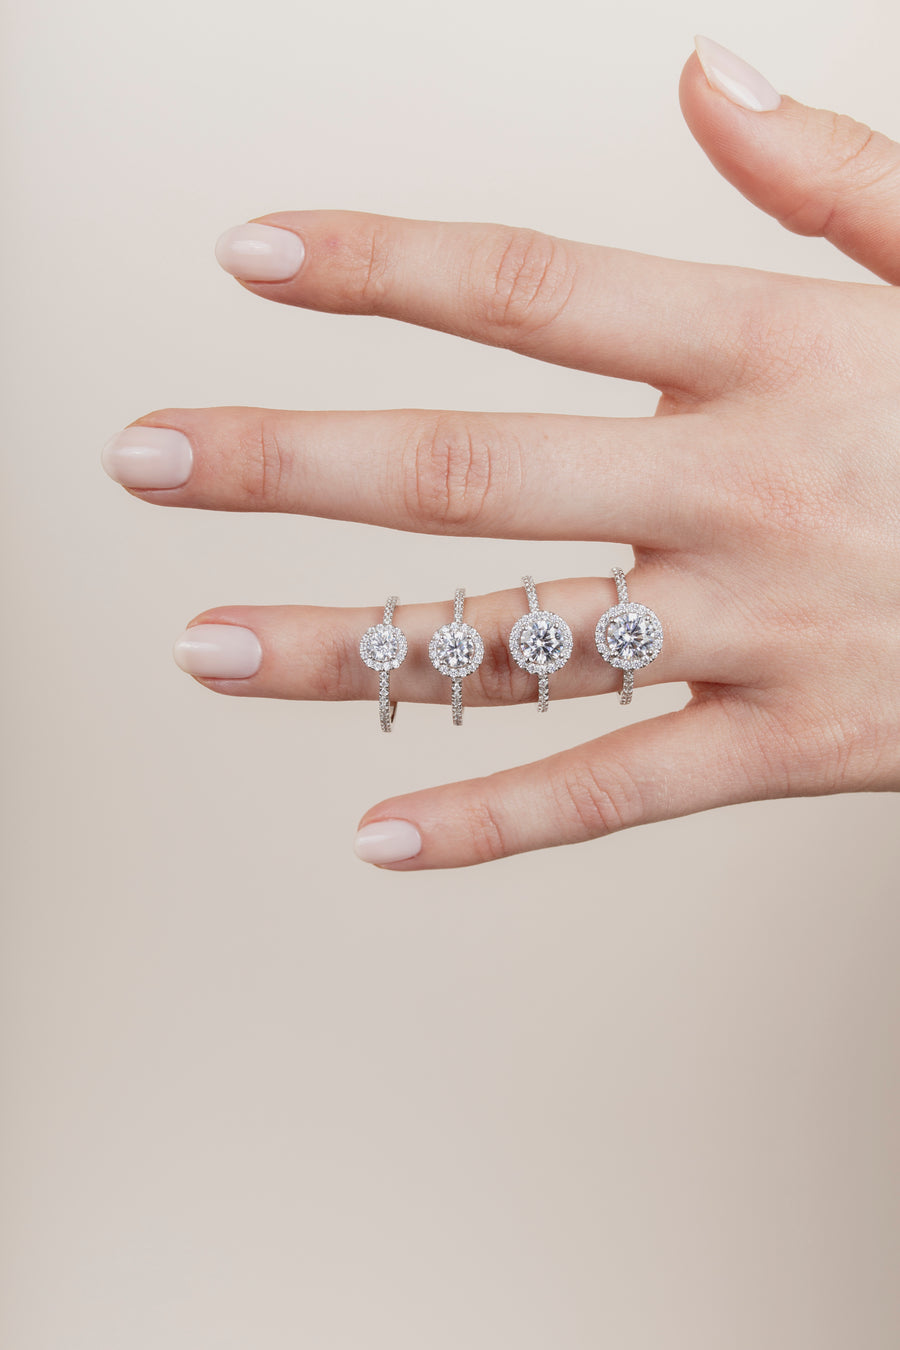 The Round Solitaire with Pavé band and Halo